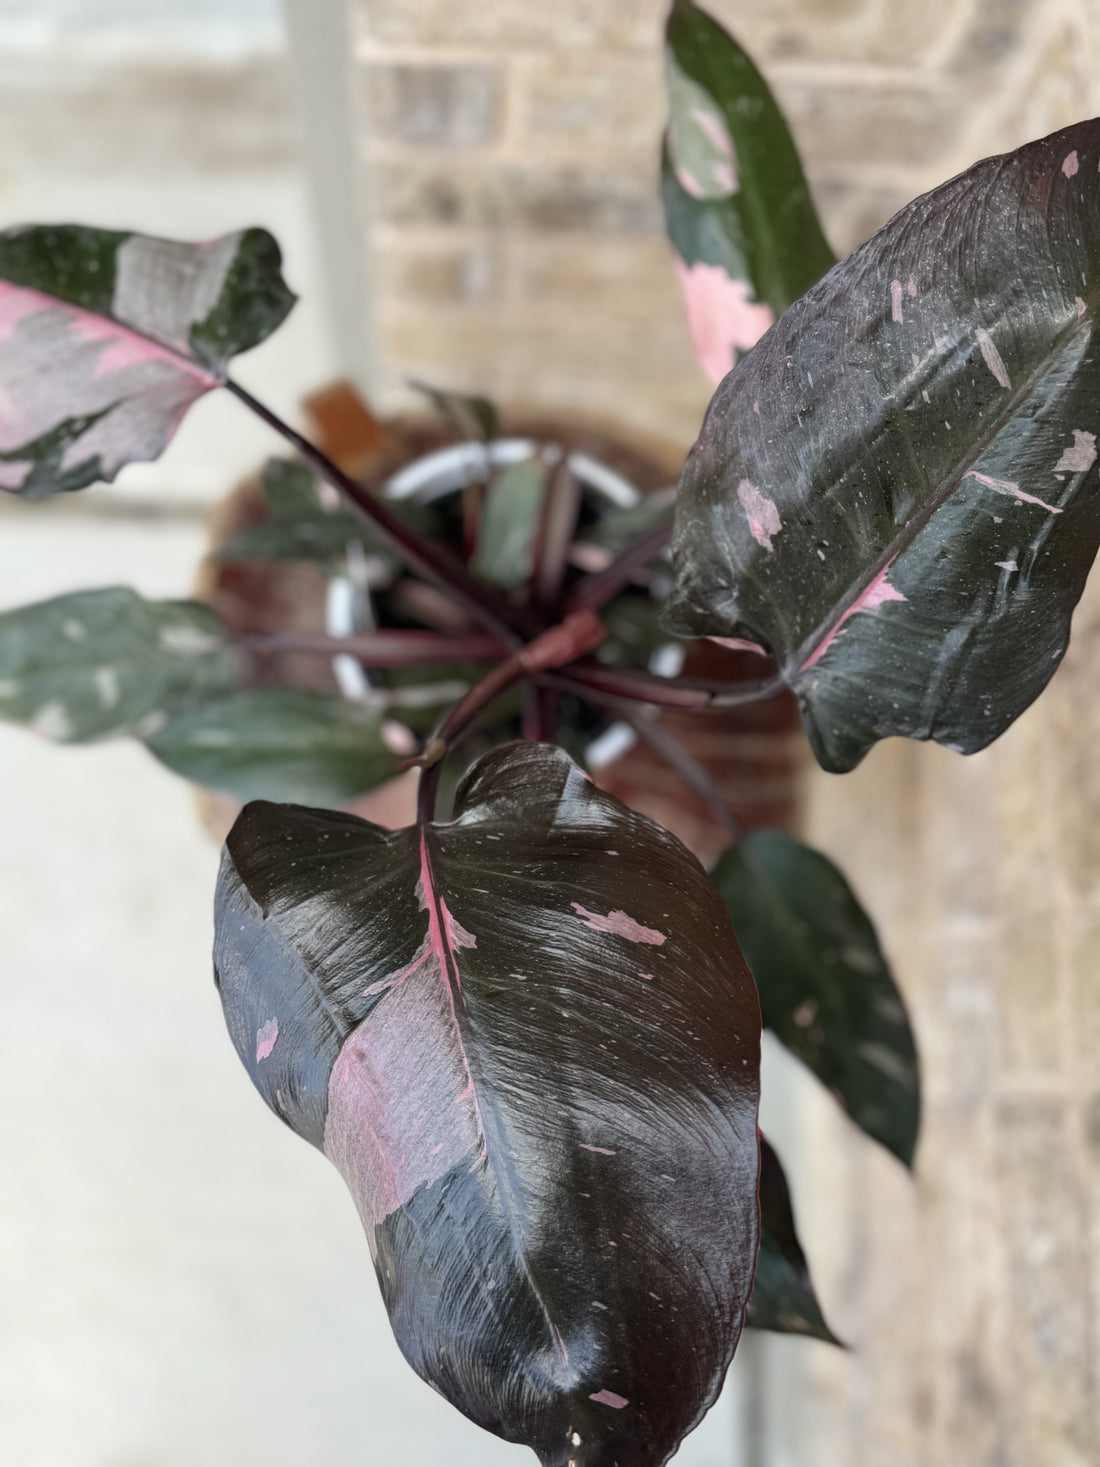 6” Philodendron Pink Princess